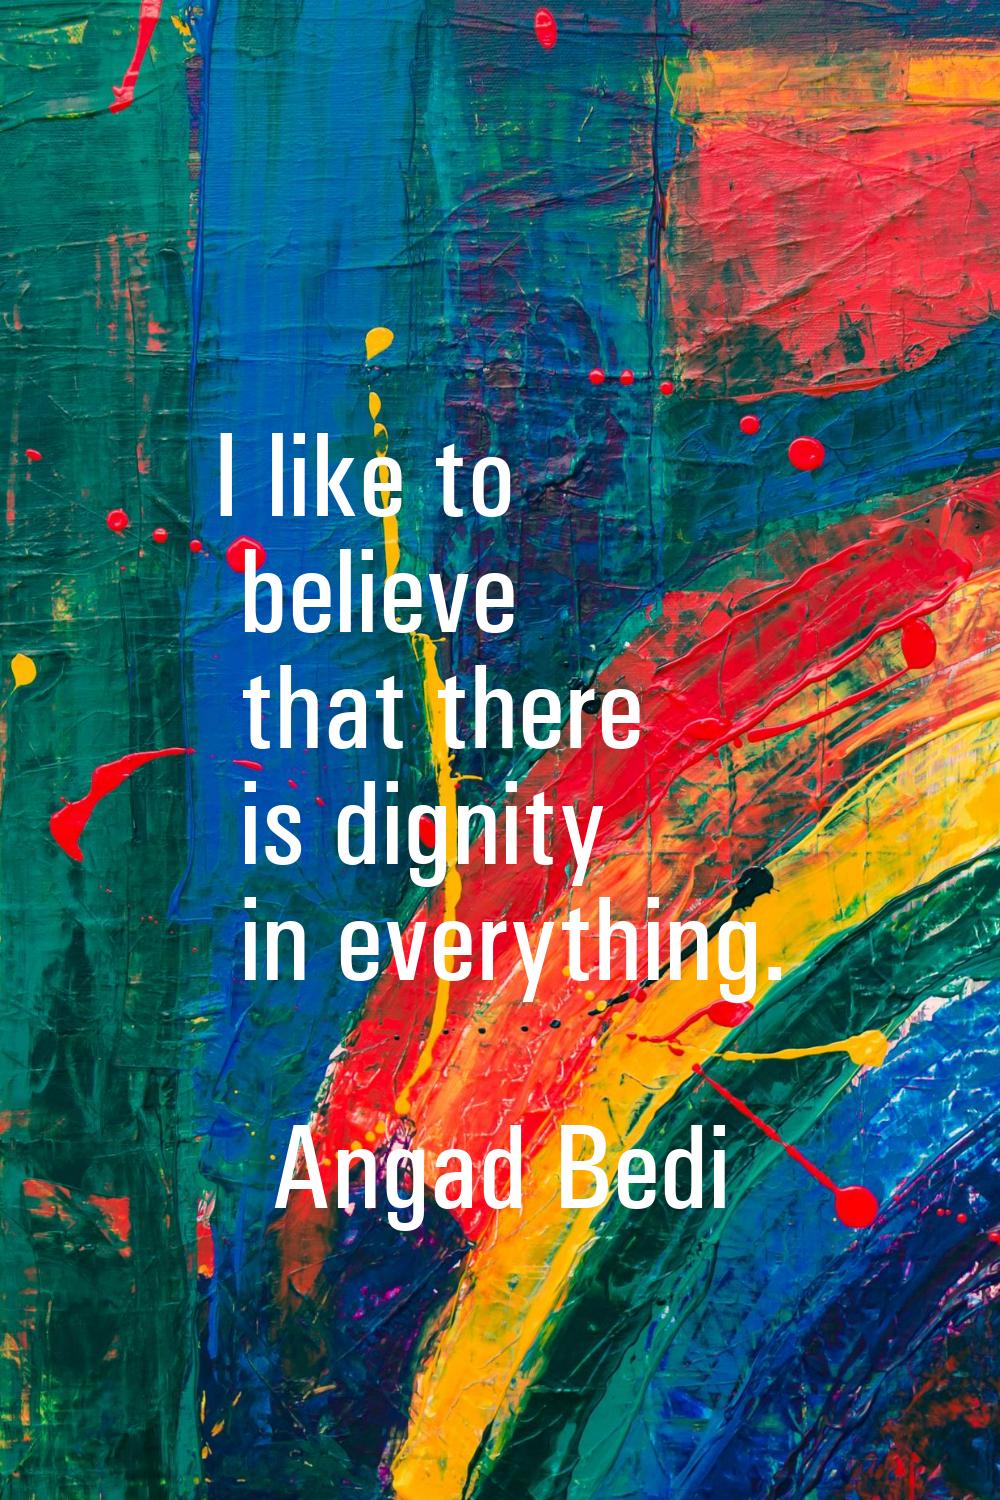 I like to believe that there is dignity in everything.